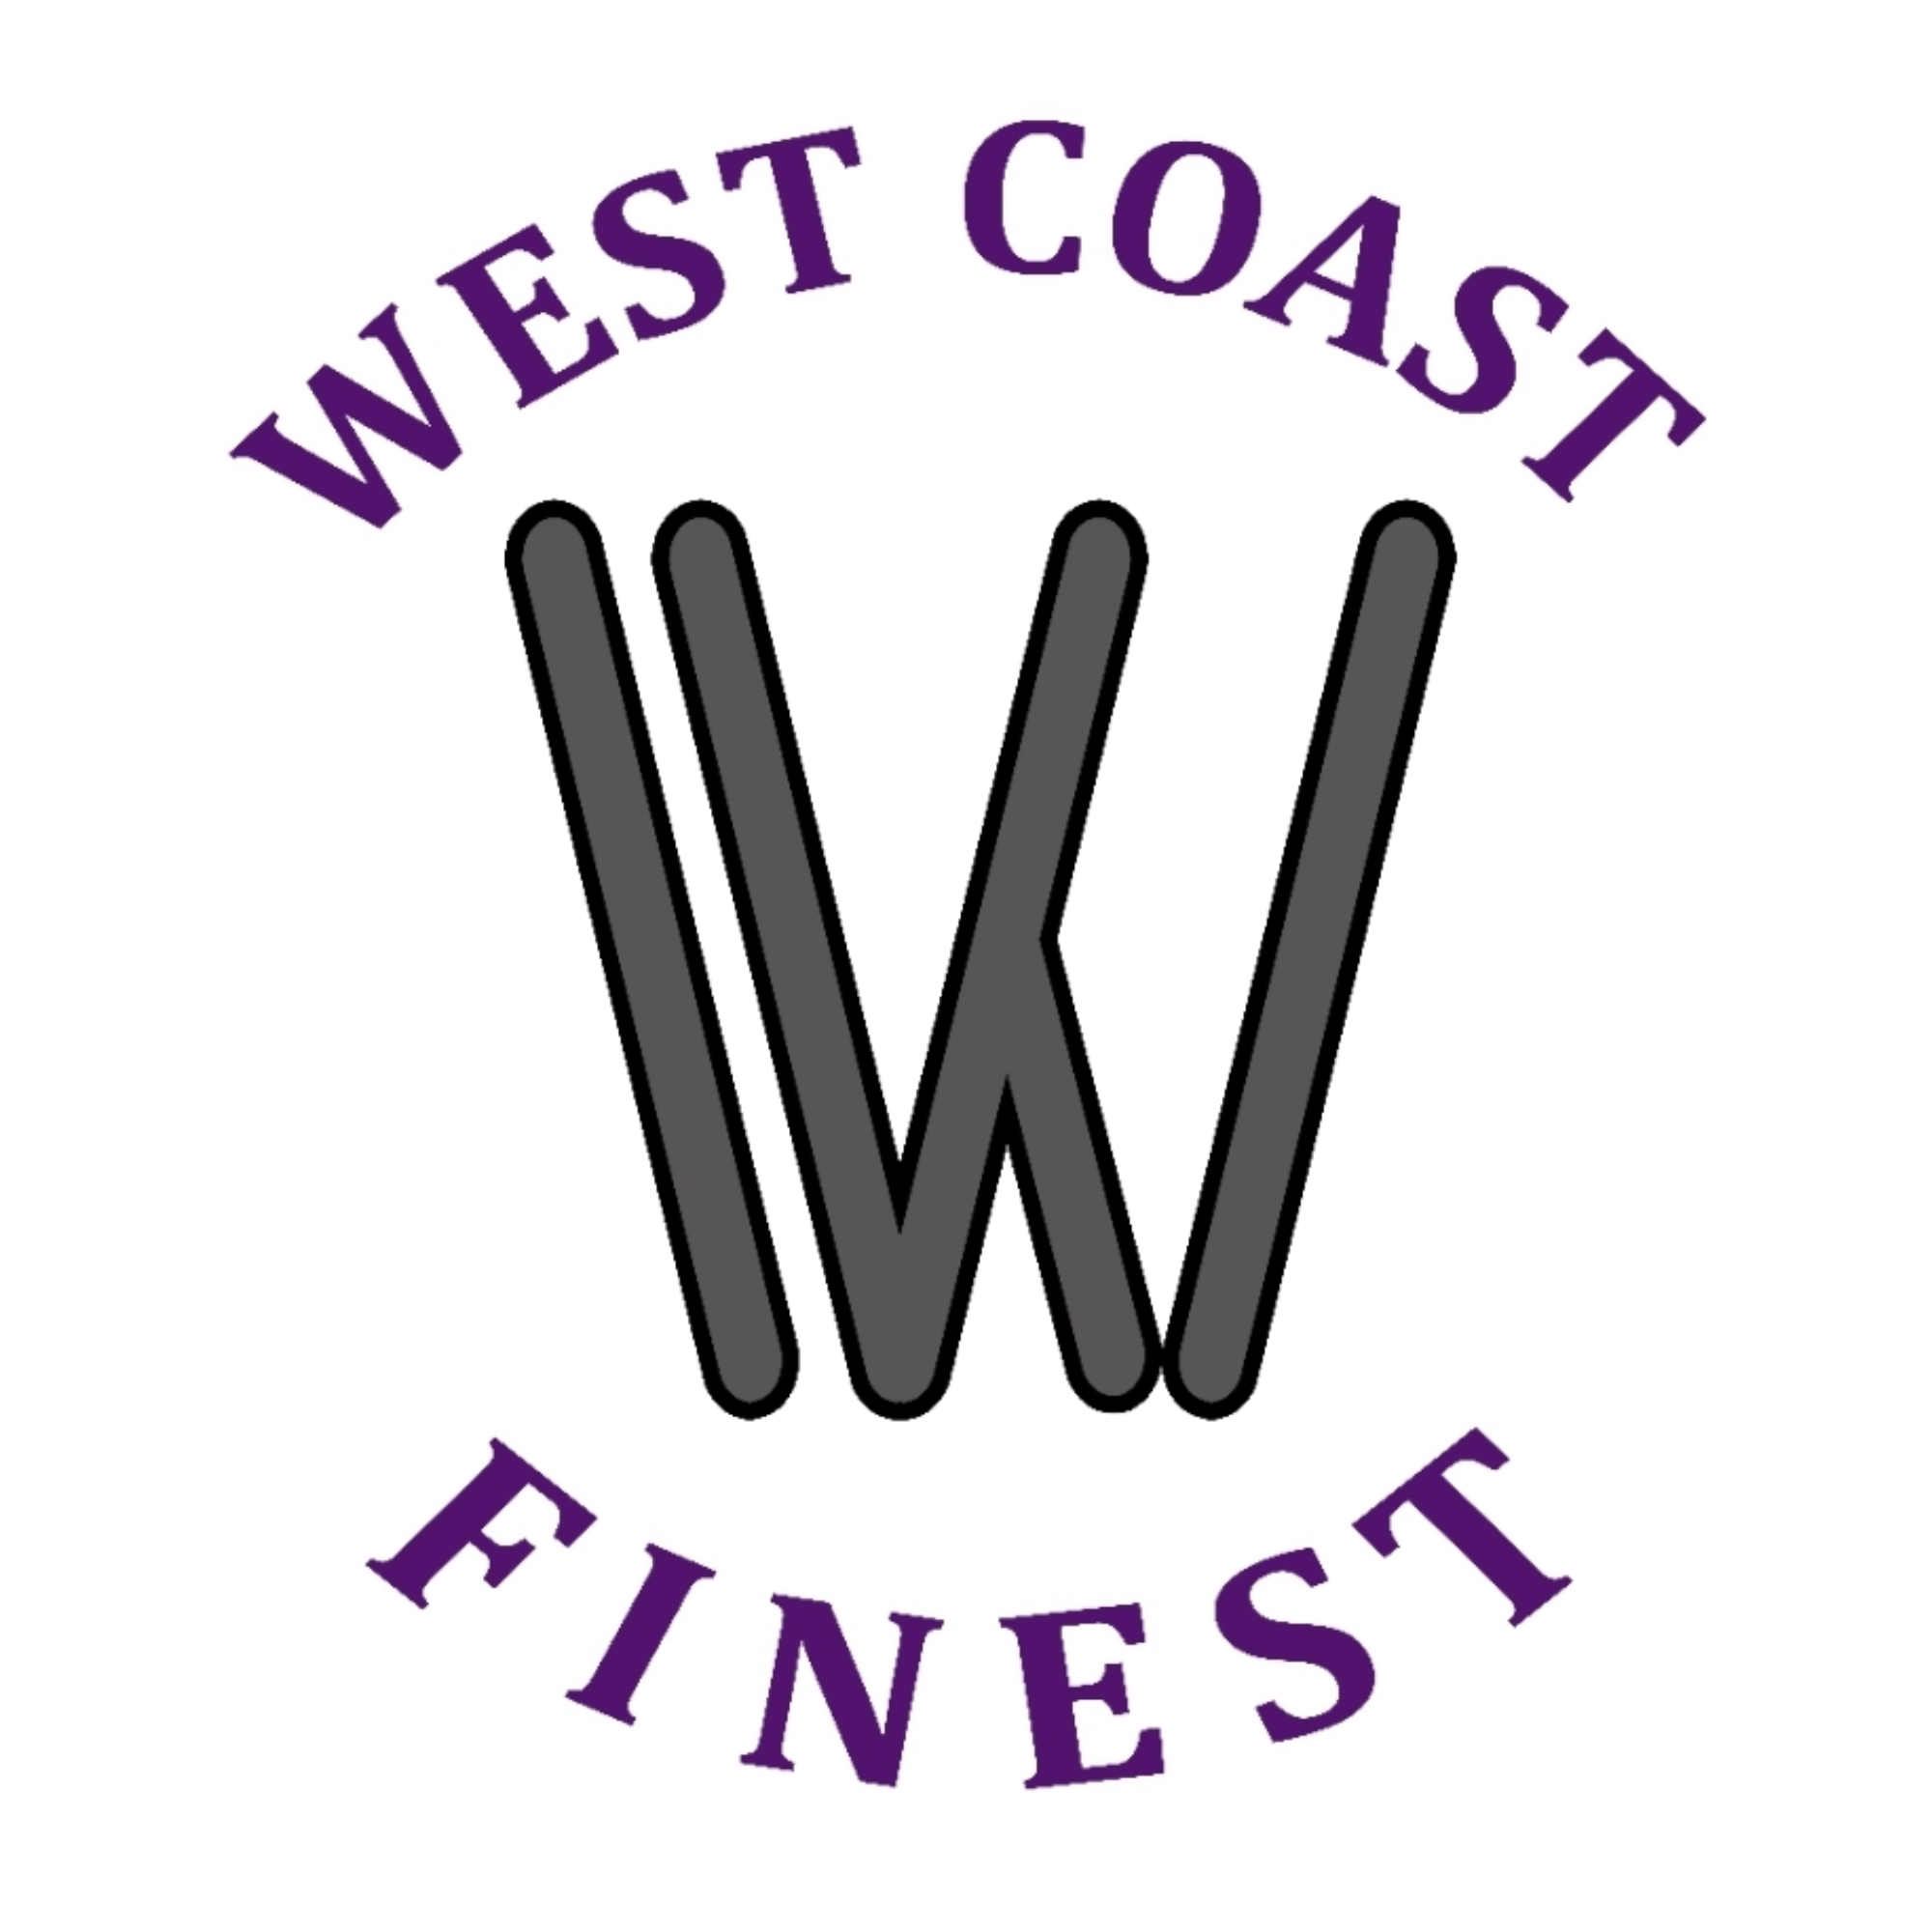 The official logo of West Coast Finest